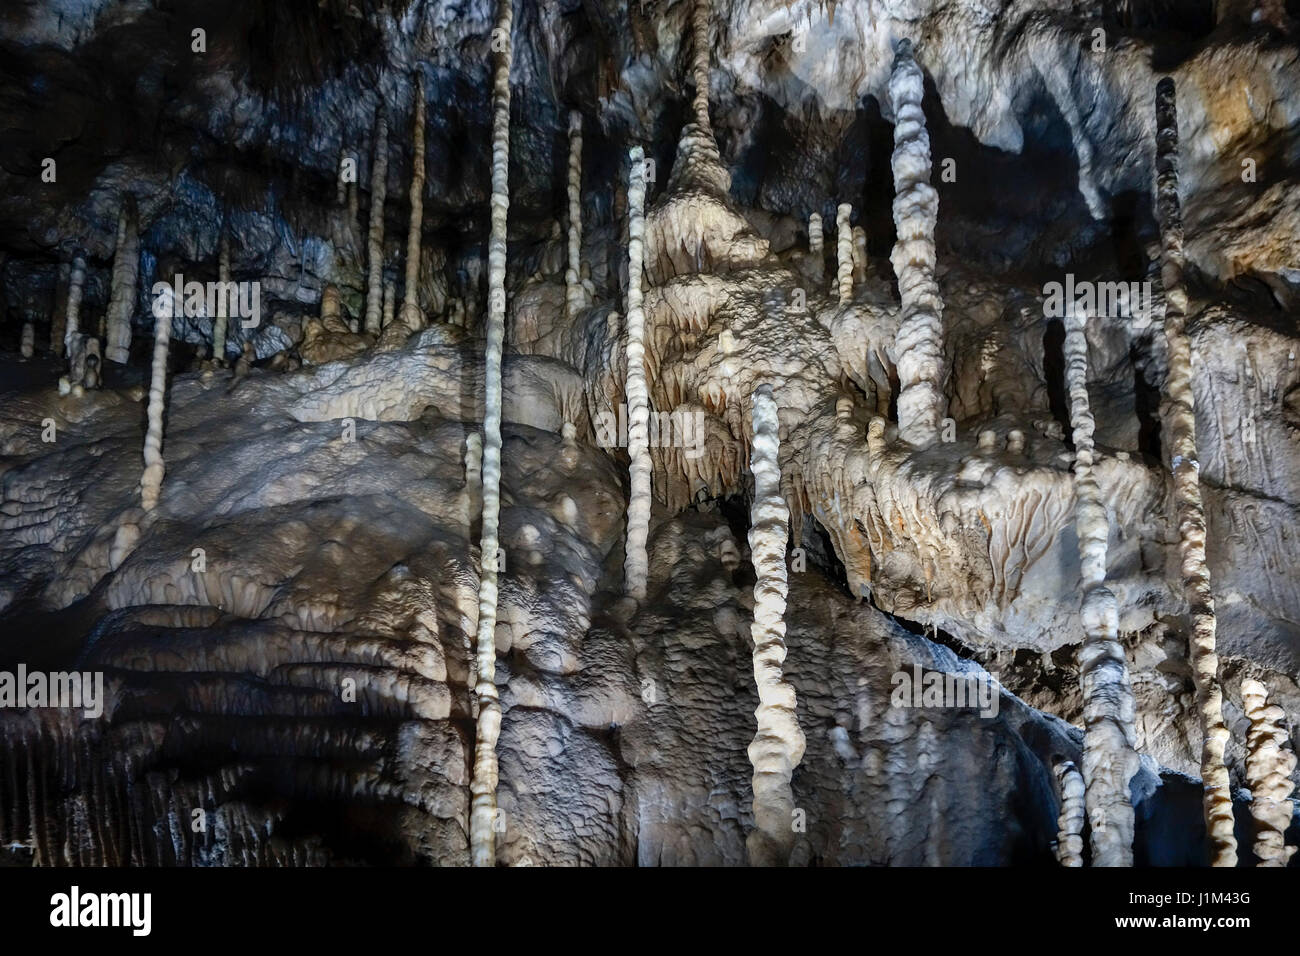 Stalactites, stalagmites and columns in limestone cave of the Caves of Han-sur-Lesse / Grottes de Han, Belgian Ardennes, Belgium Stock Photo